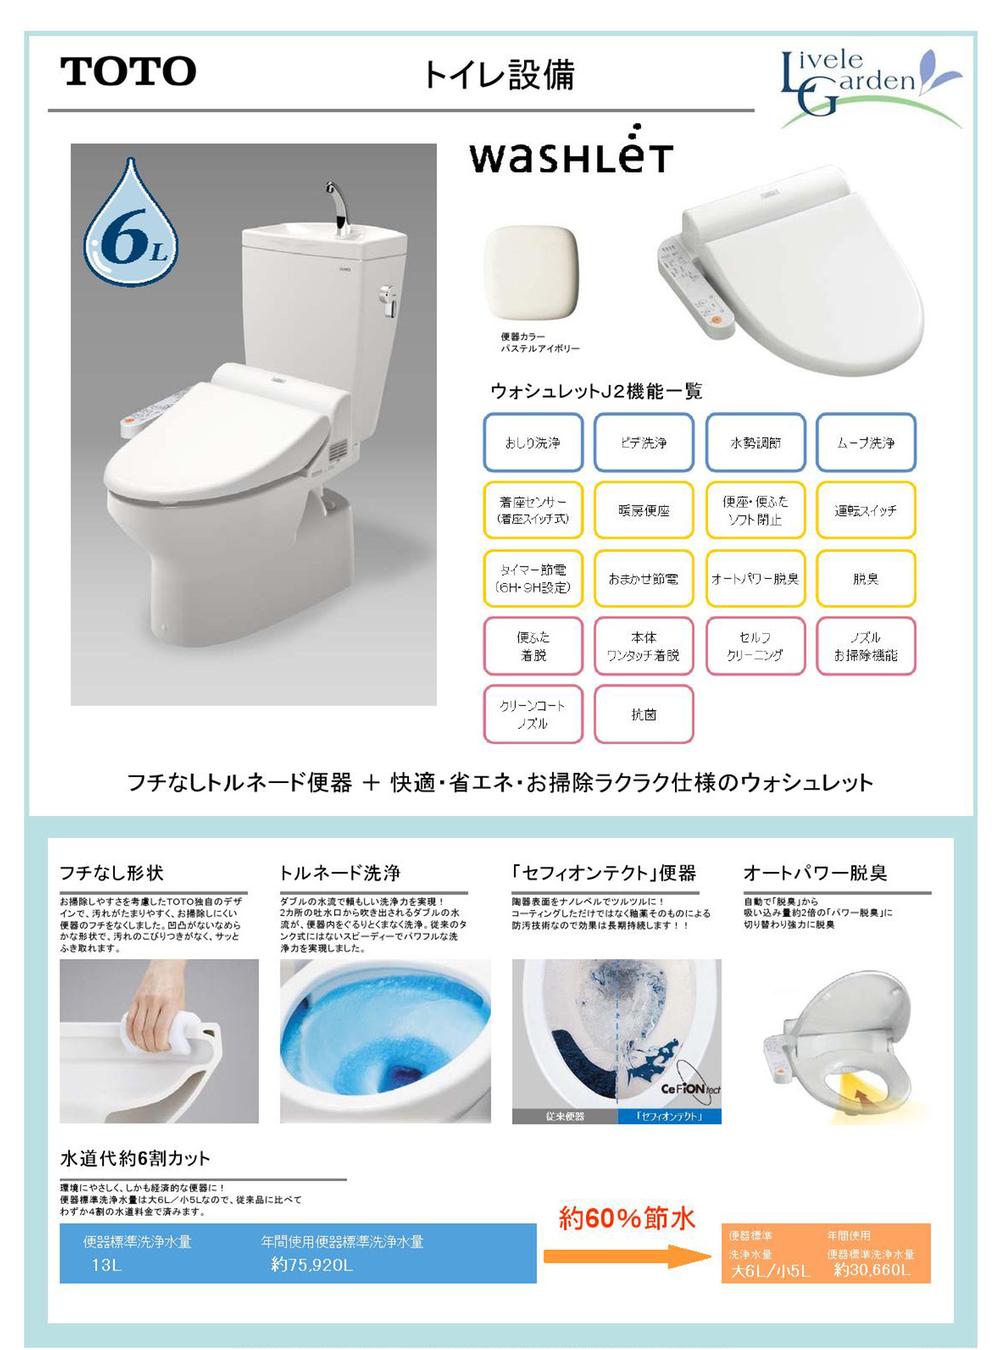 Toilet. Specification example Cleaning Easy ・ Water-saving type